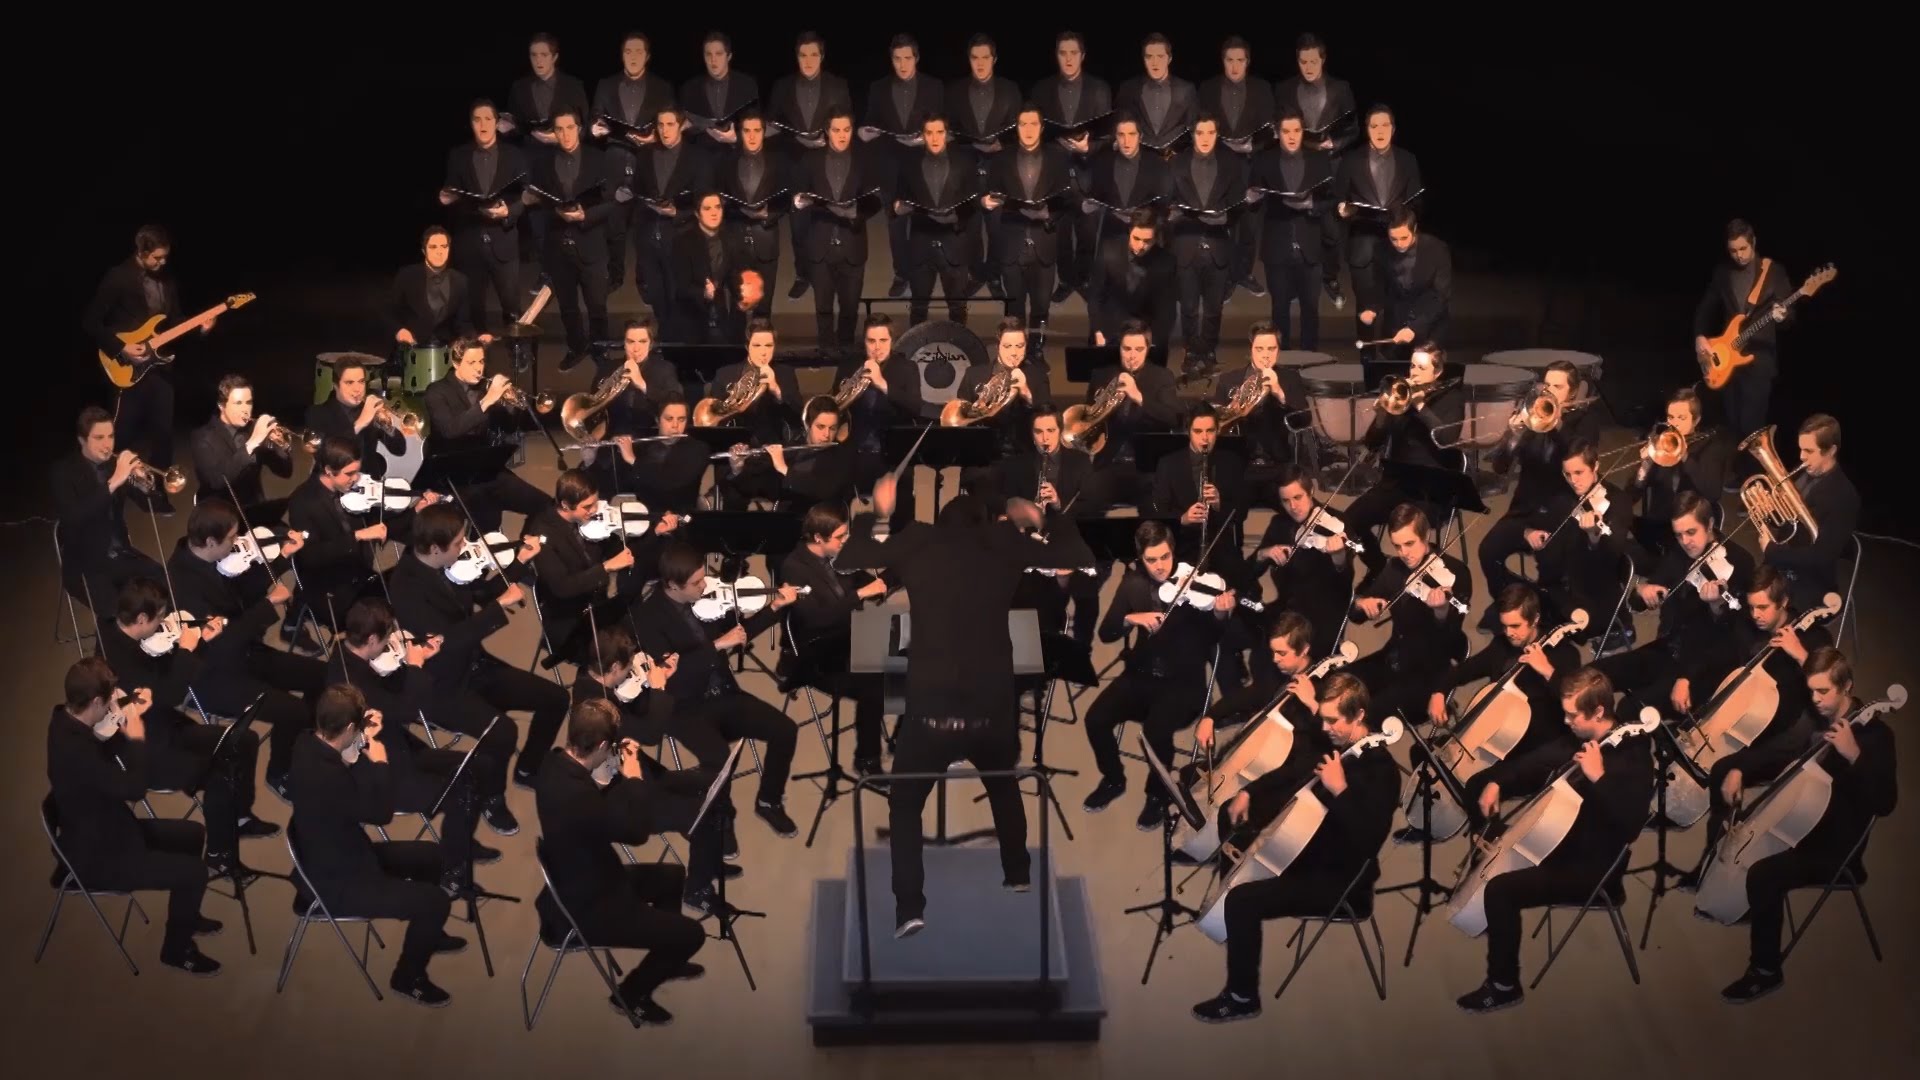 Musician Creates One-Man Orchestra From His Bedroom